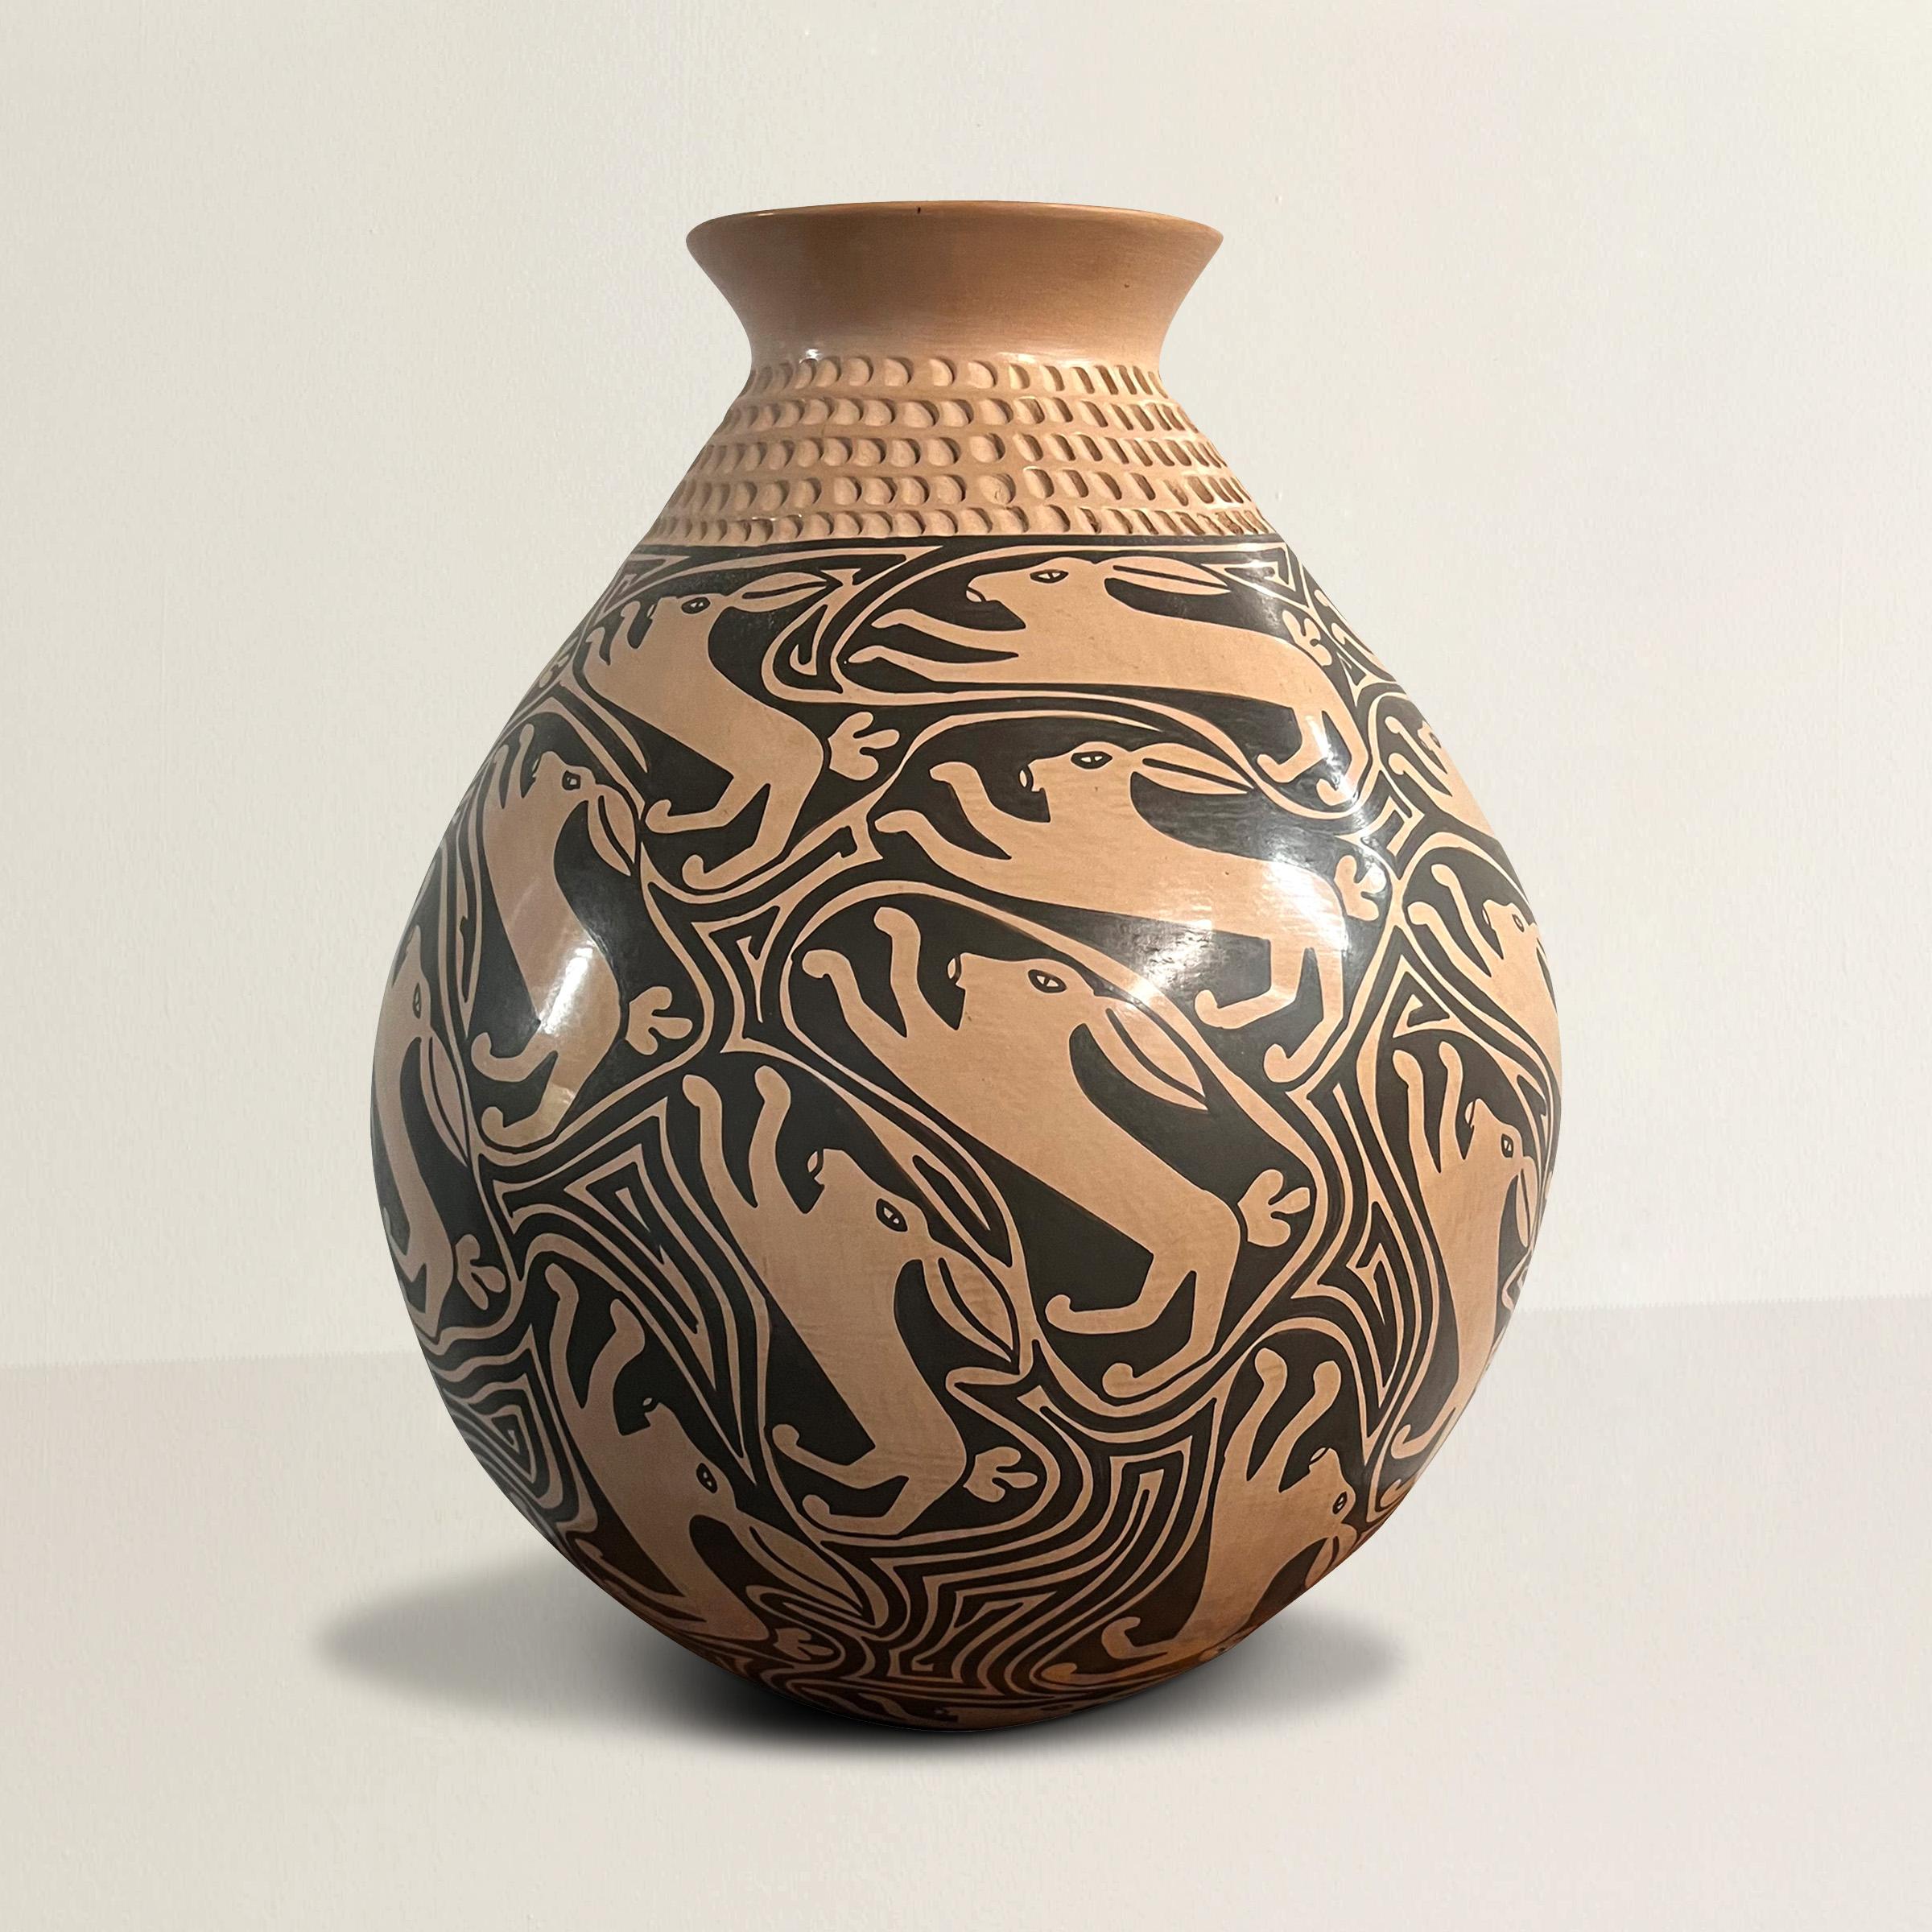 This remarkable Mata Ortiz pottery piece, handcrafted by the renowned artist Gloria Hernandez, is a testament to the enduring artistry of the Mata Ortiz tradition. Gloria Hernandez, a luminary in the world of Mata Ortiz pottery, has made significant